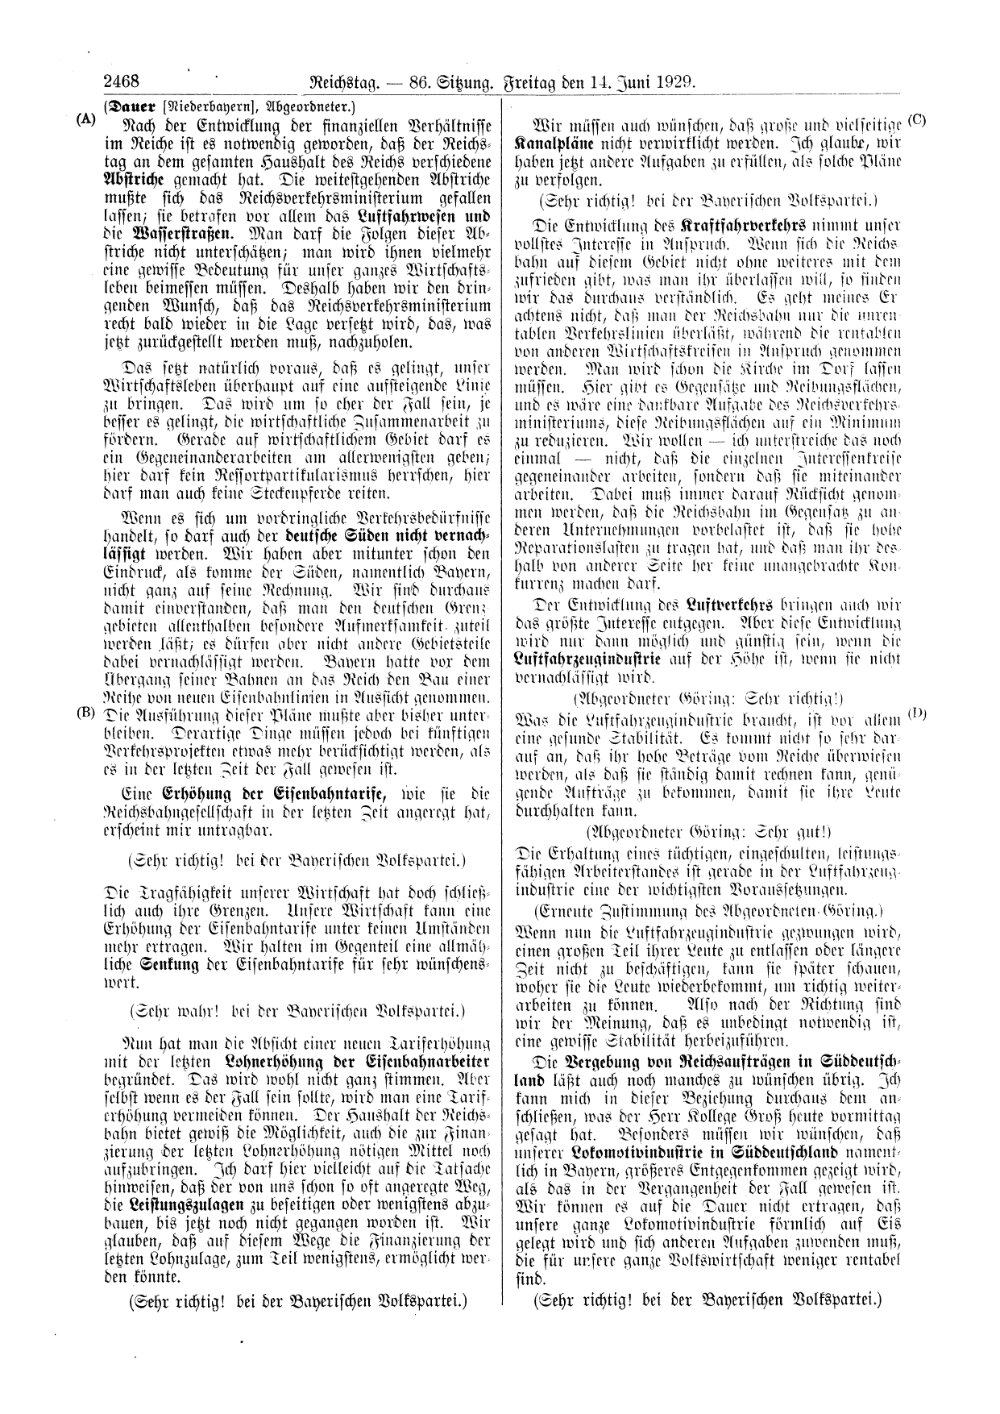 Scan of page 2468